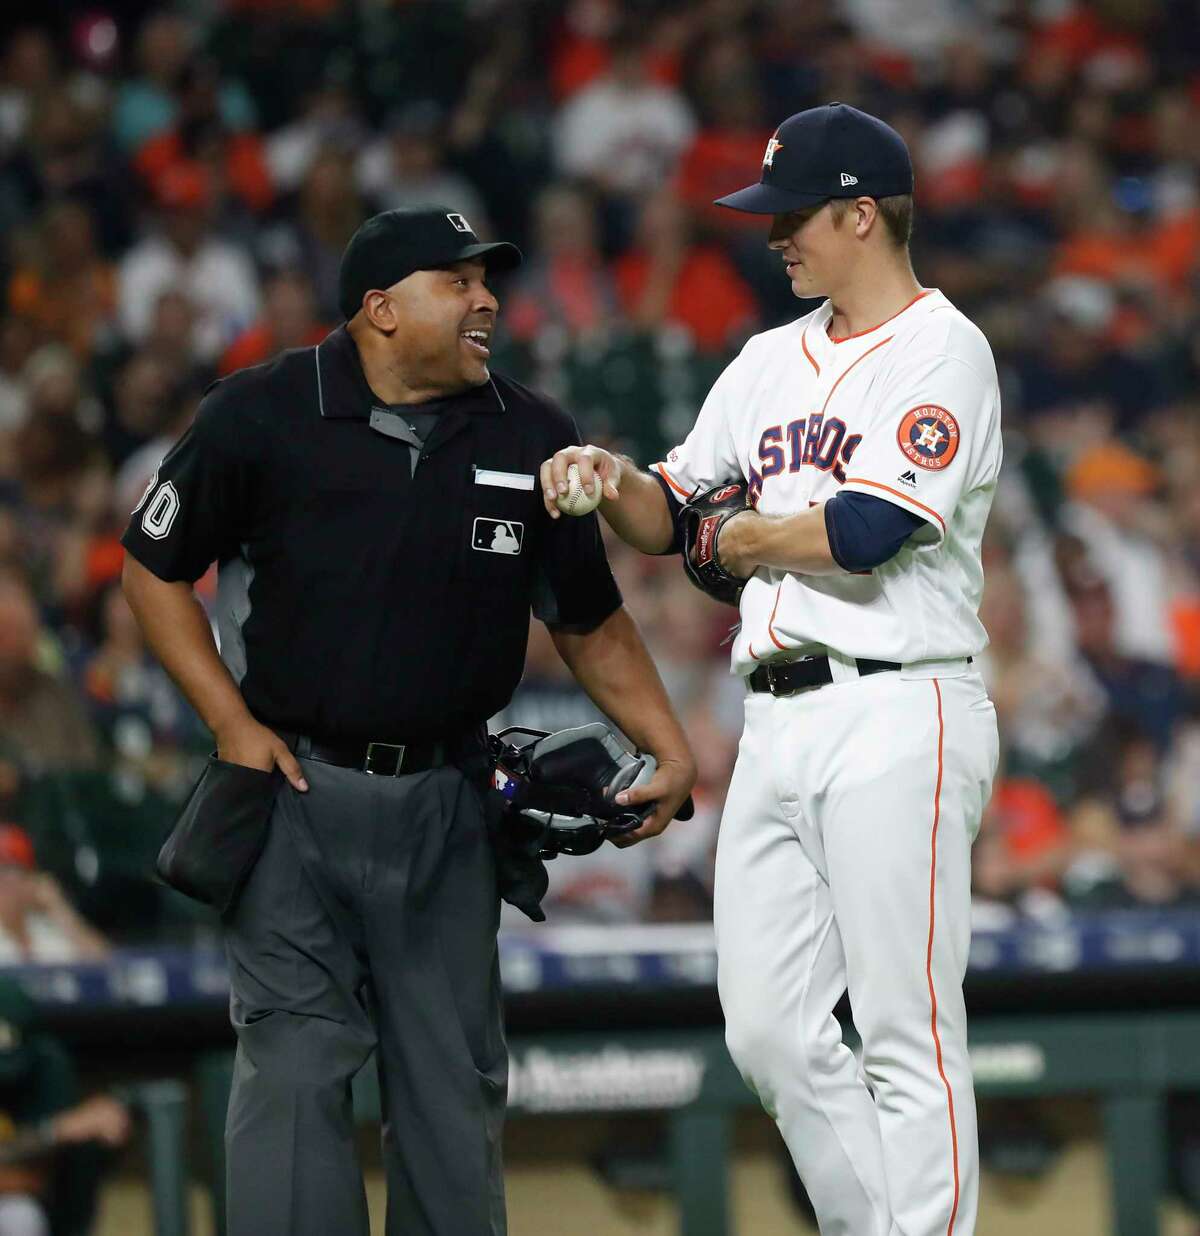 Houston Astros starting pitcher Zack Greinke (21) chats with home plate umpire Adrian Johnson during the fifth inning of an MLB baseball game at Minute Maid Park, Monday, Sept. 9, 2019, in Houston.